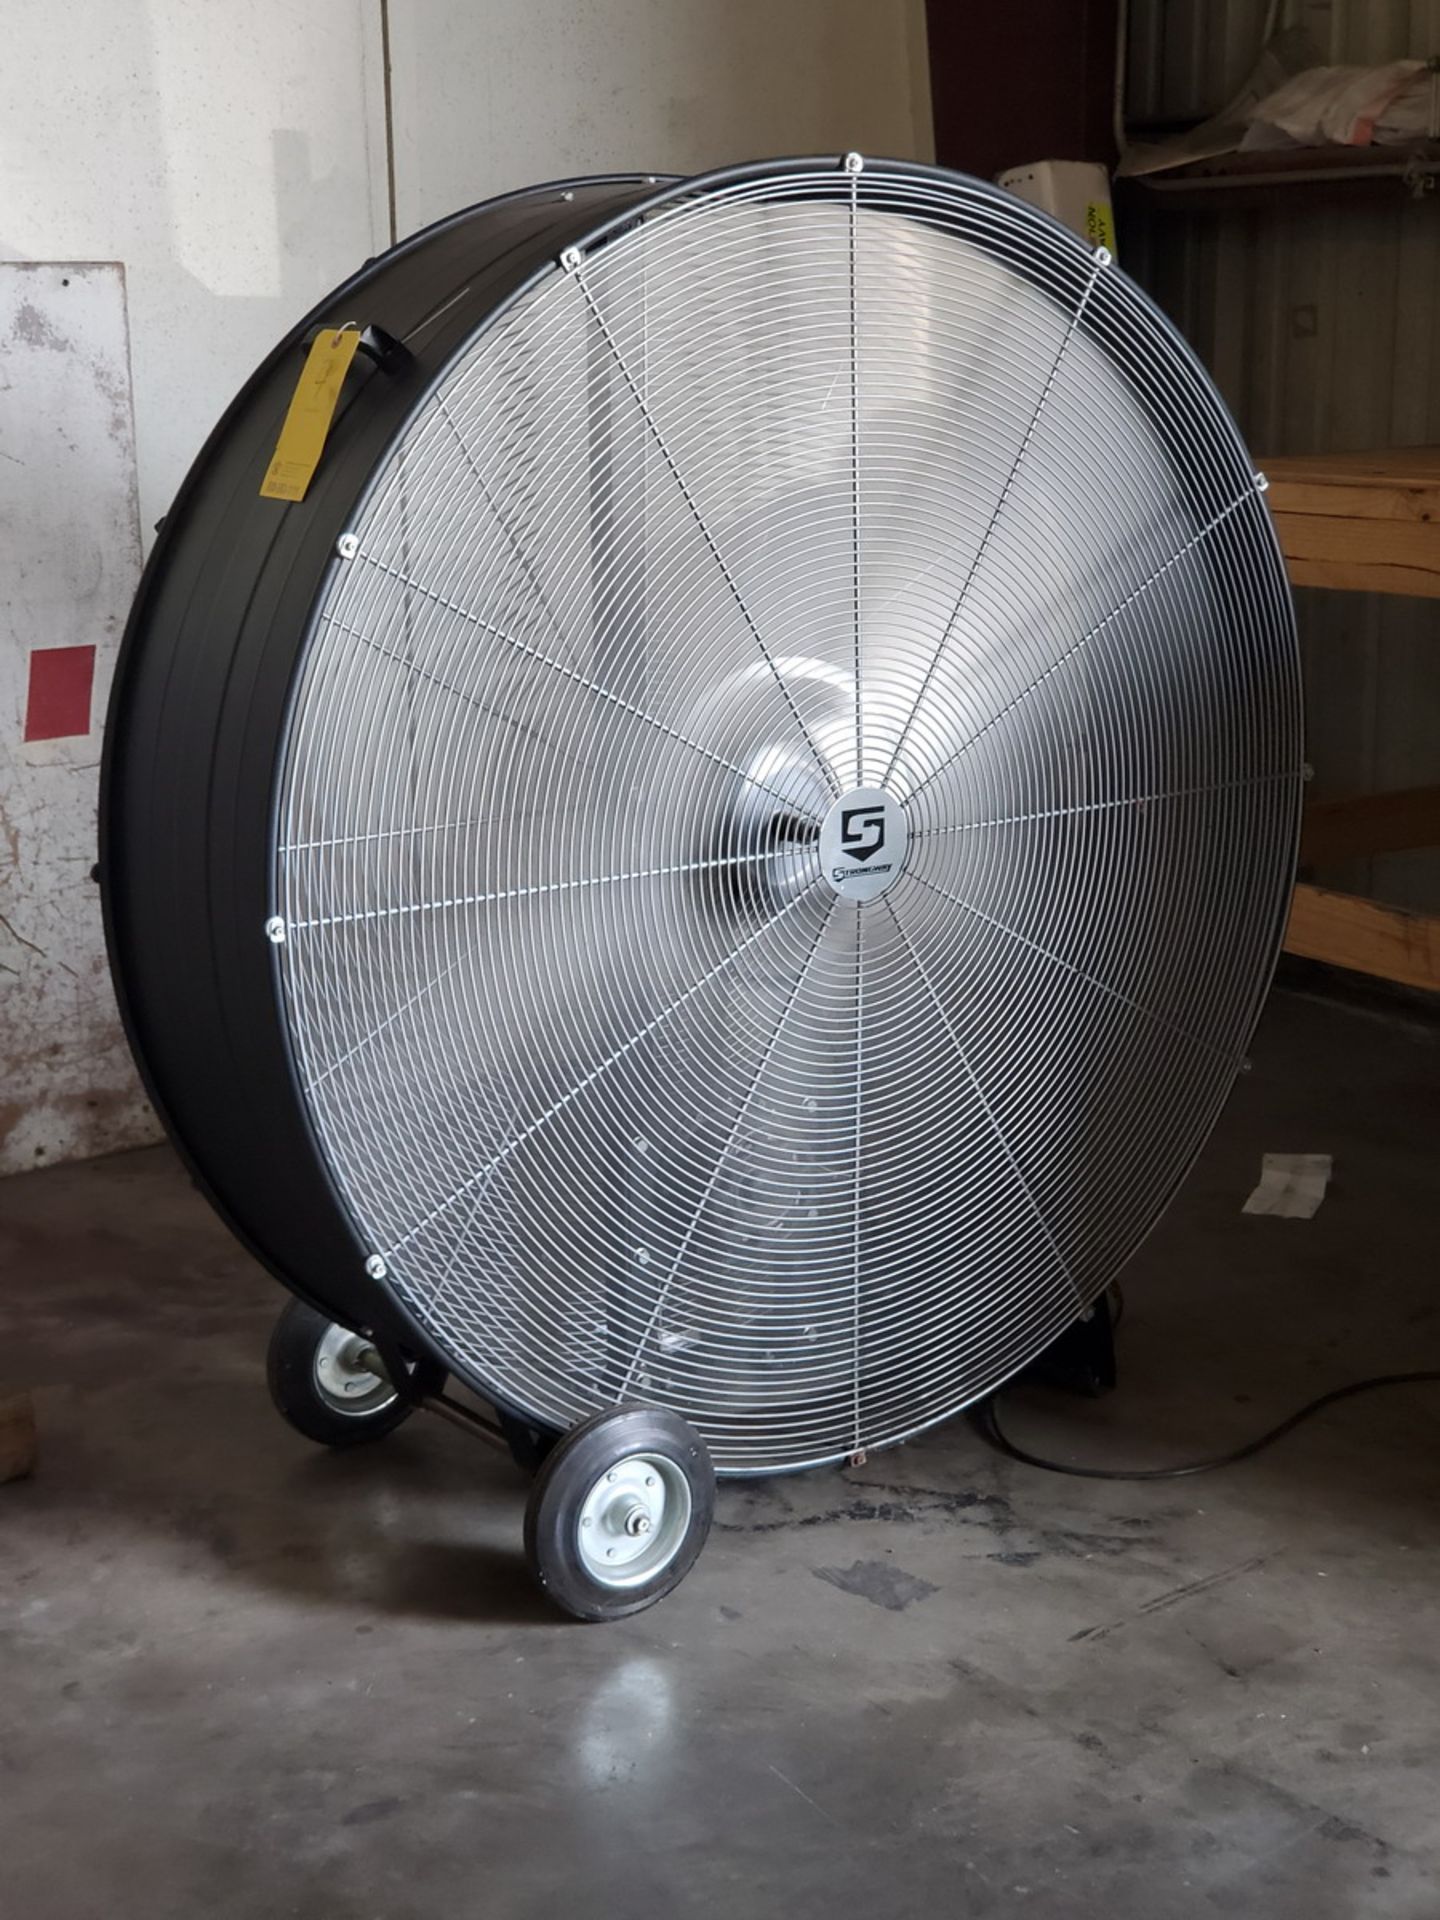 Strongway (2) 48" Drum Fans 120V, 9A, 60HZ - Image 2 of 3